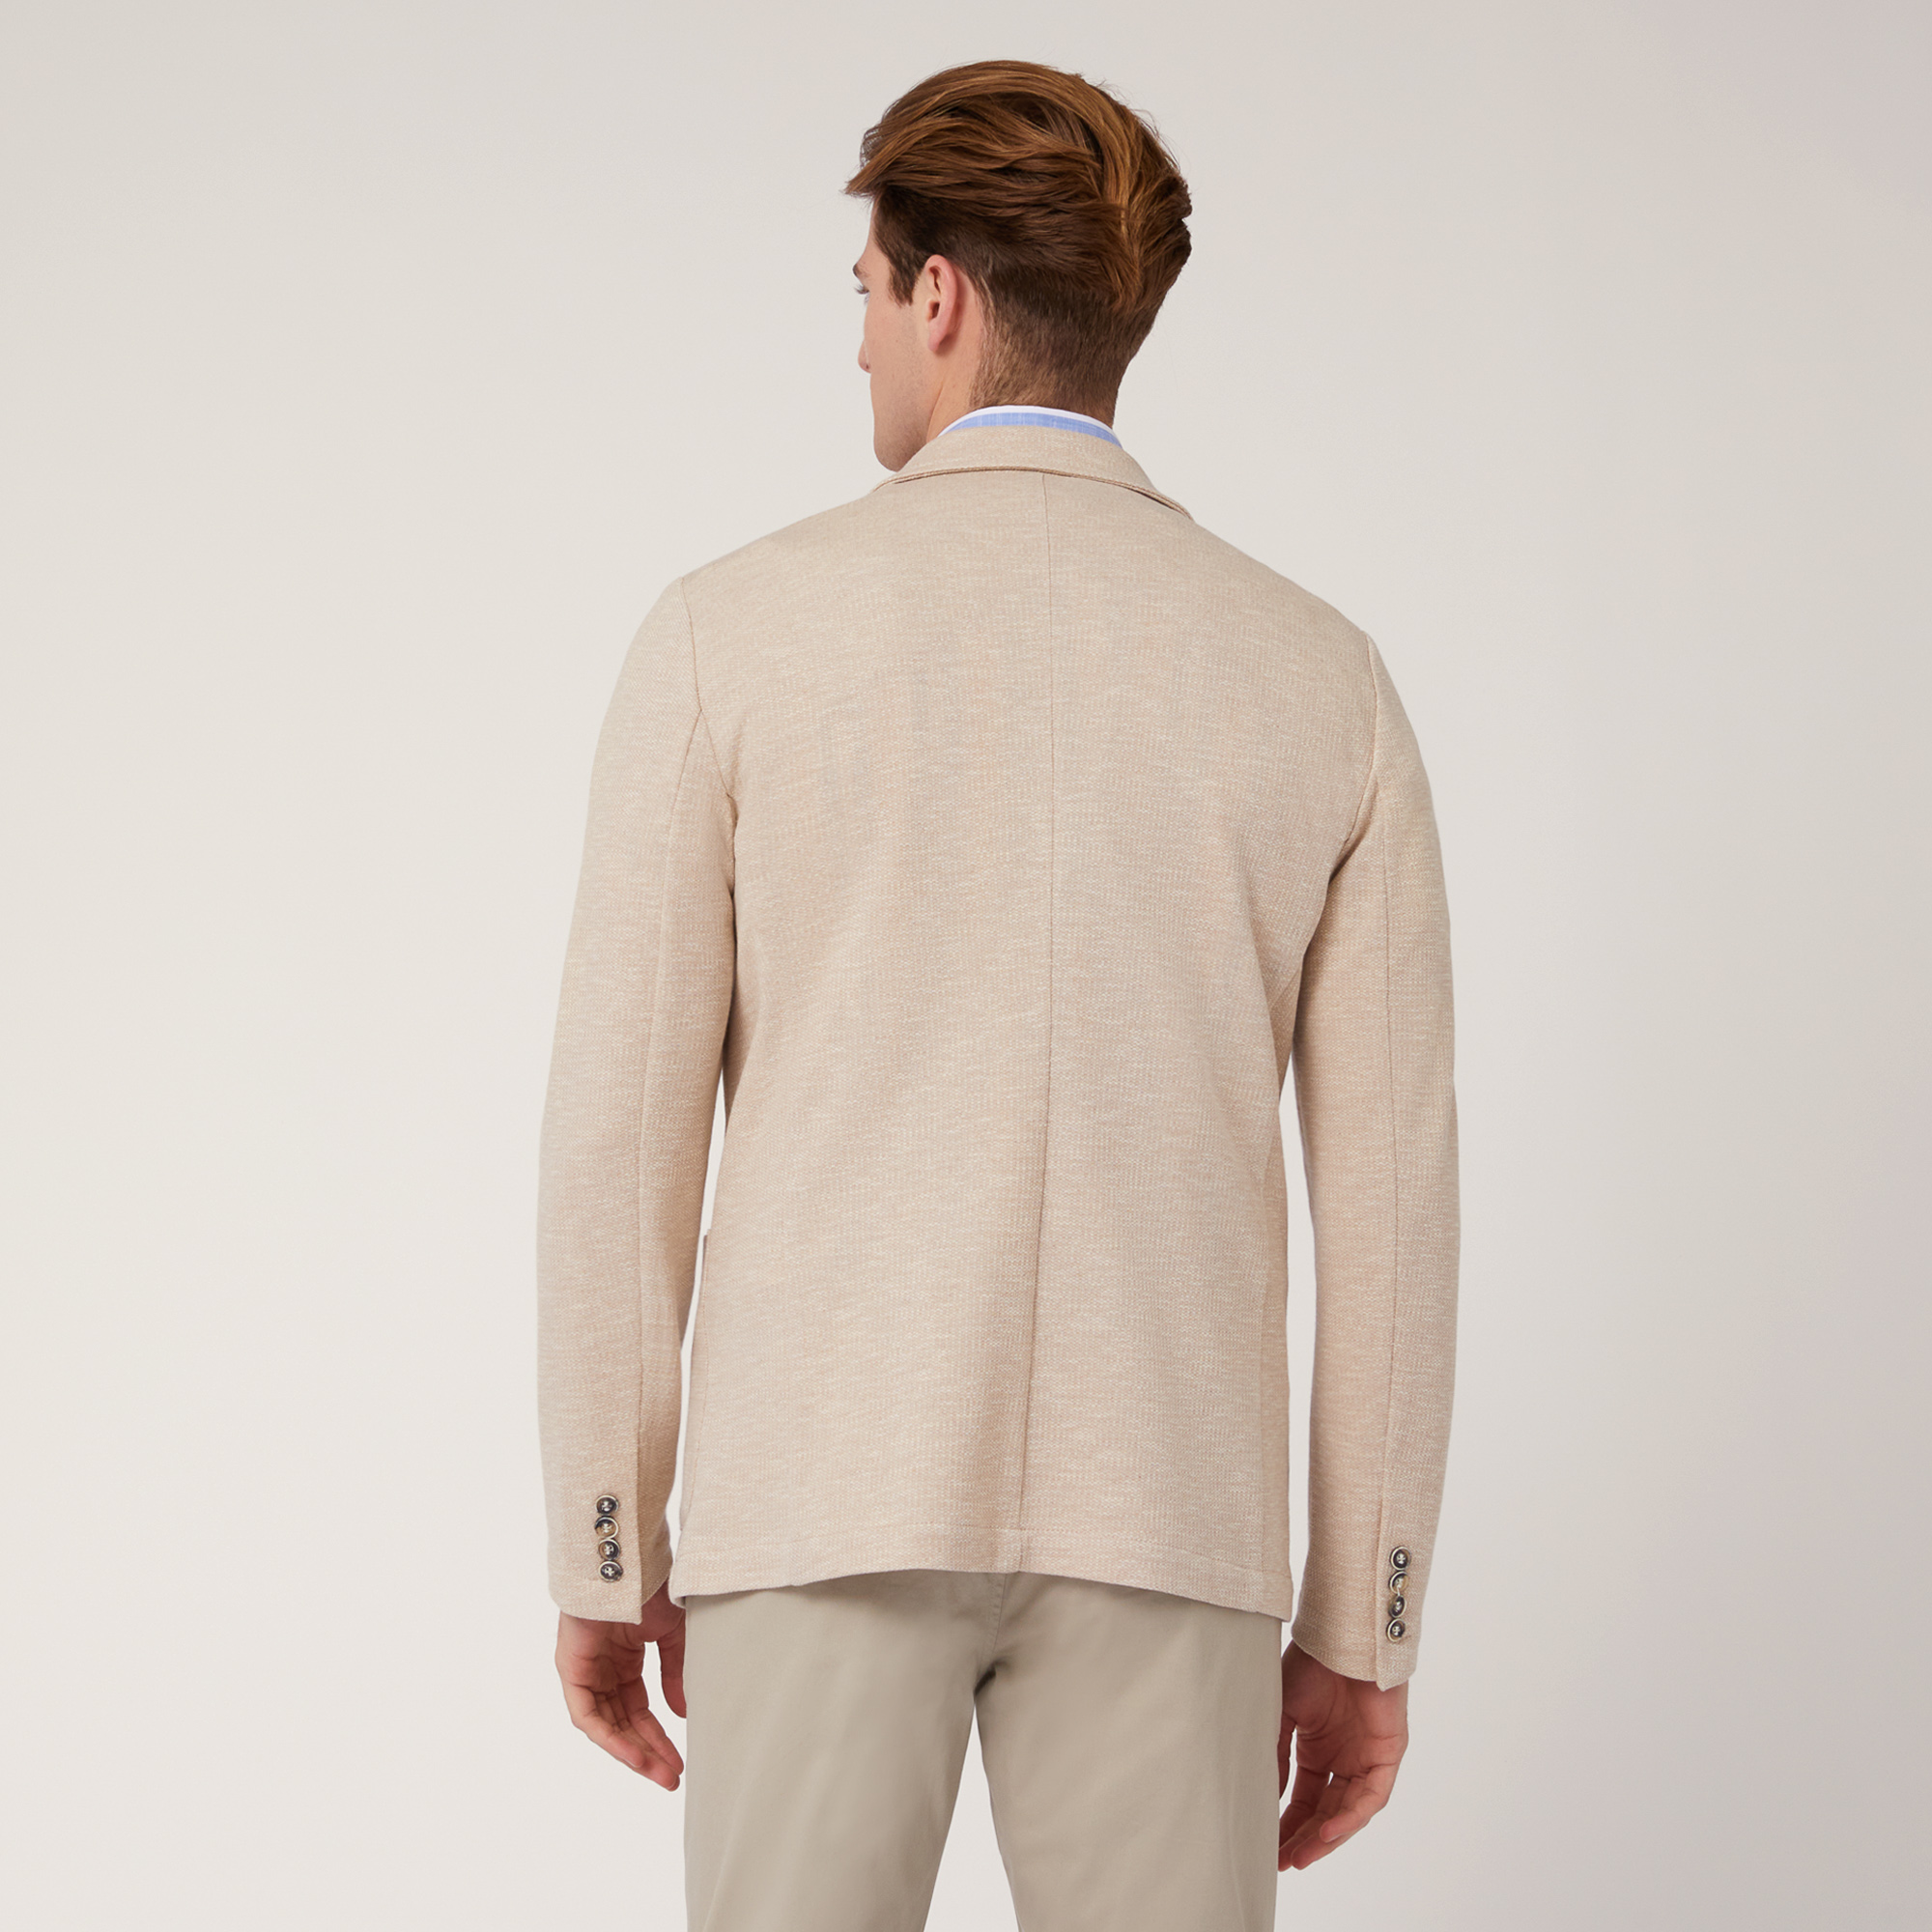 Giacca In Jersey Misto Cotone, Beige, large image number 1